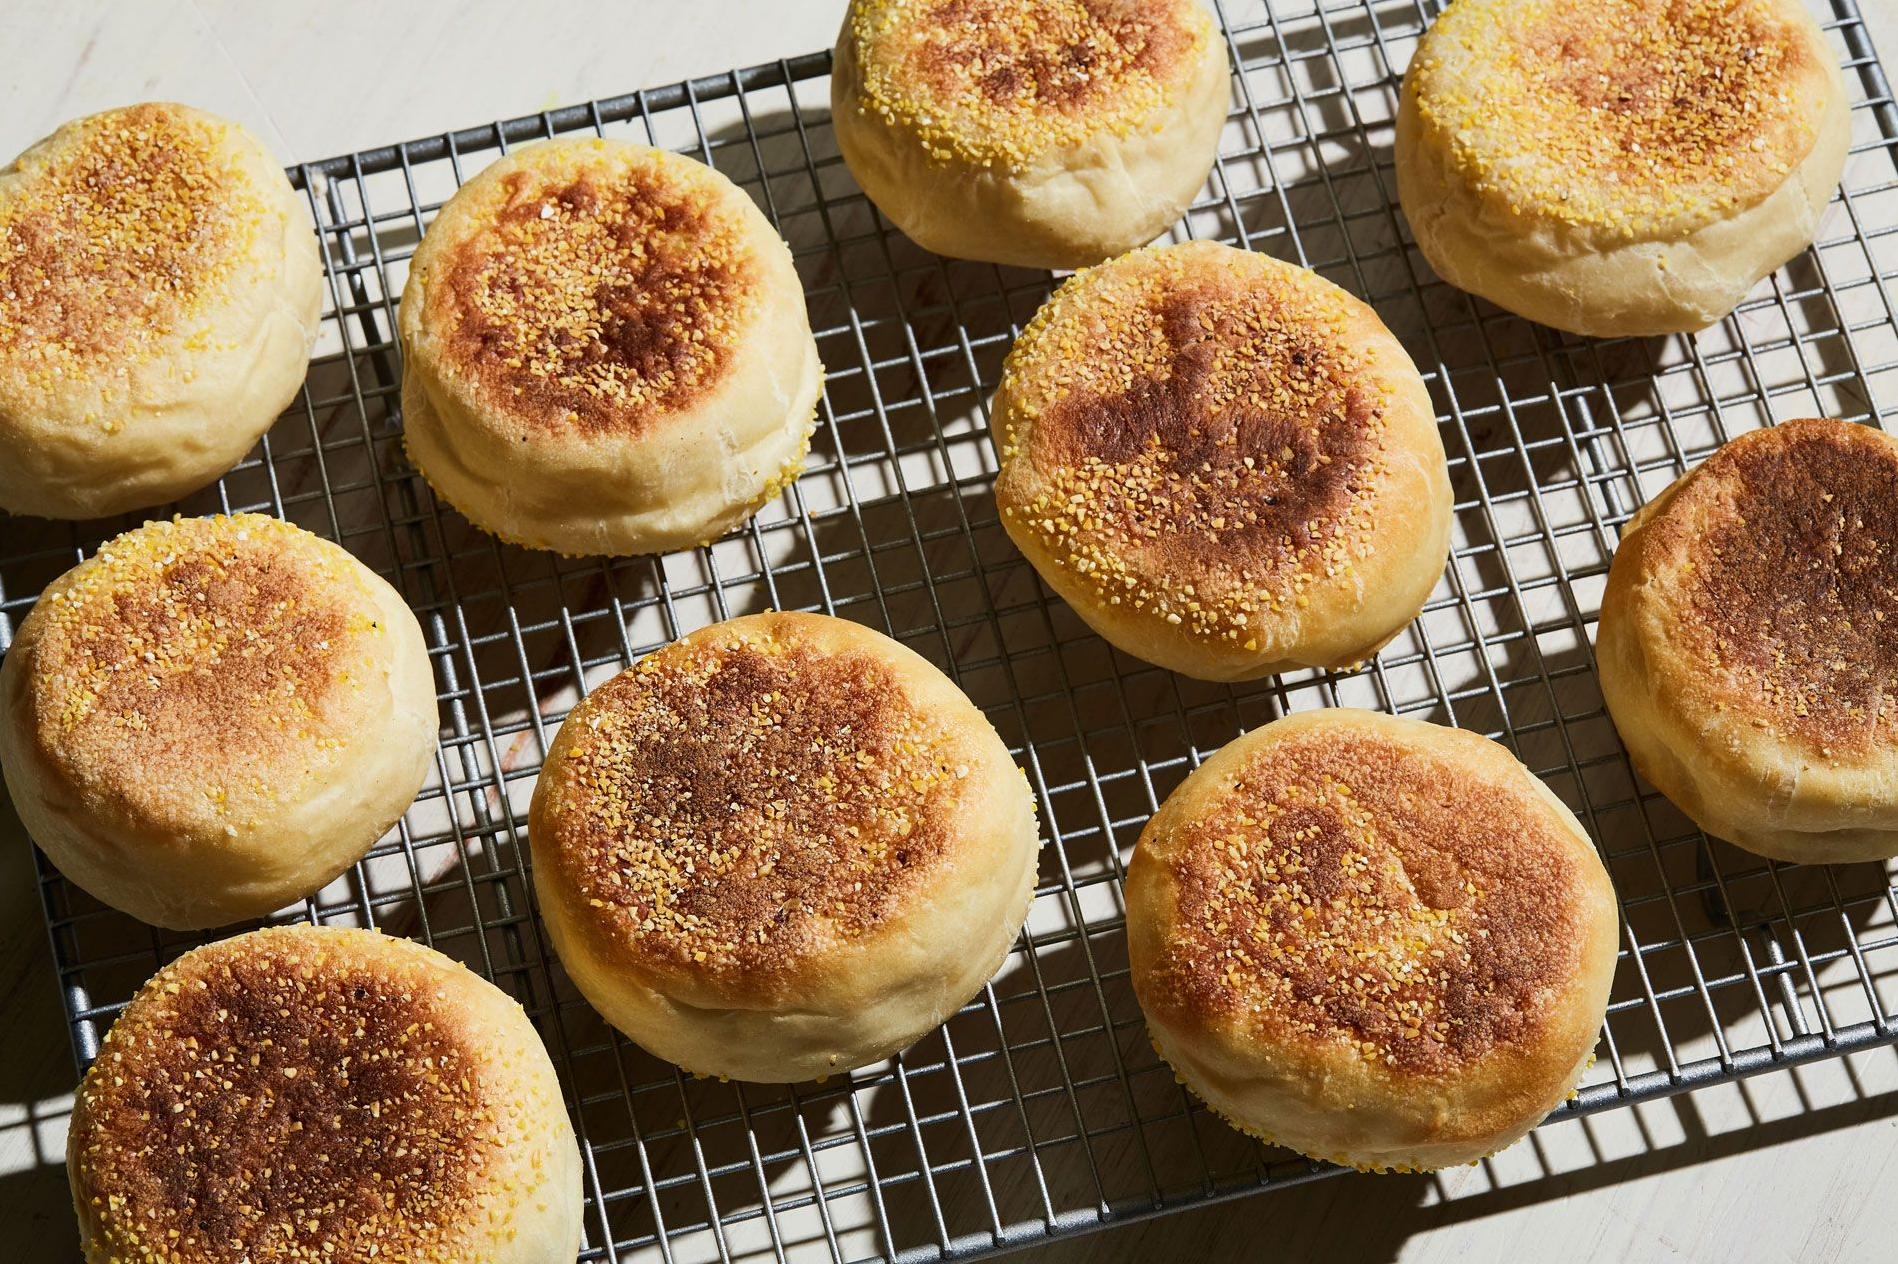  A buttery, flavor-packed English muffin, perfect for a cozy breakfast at home